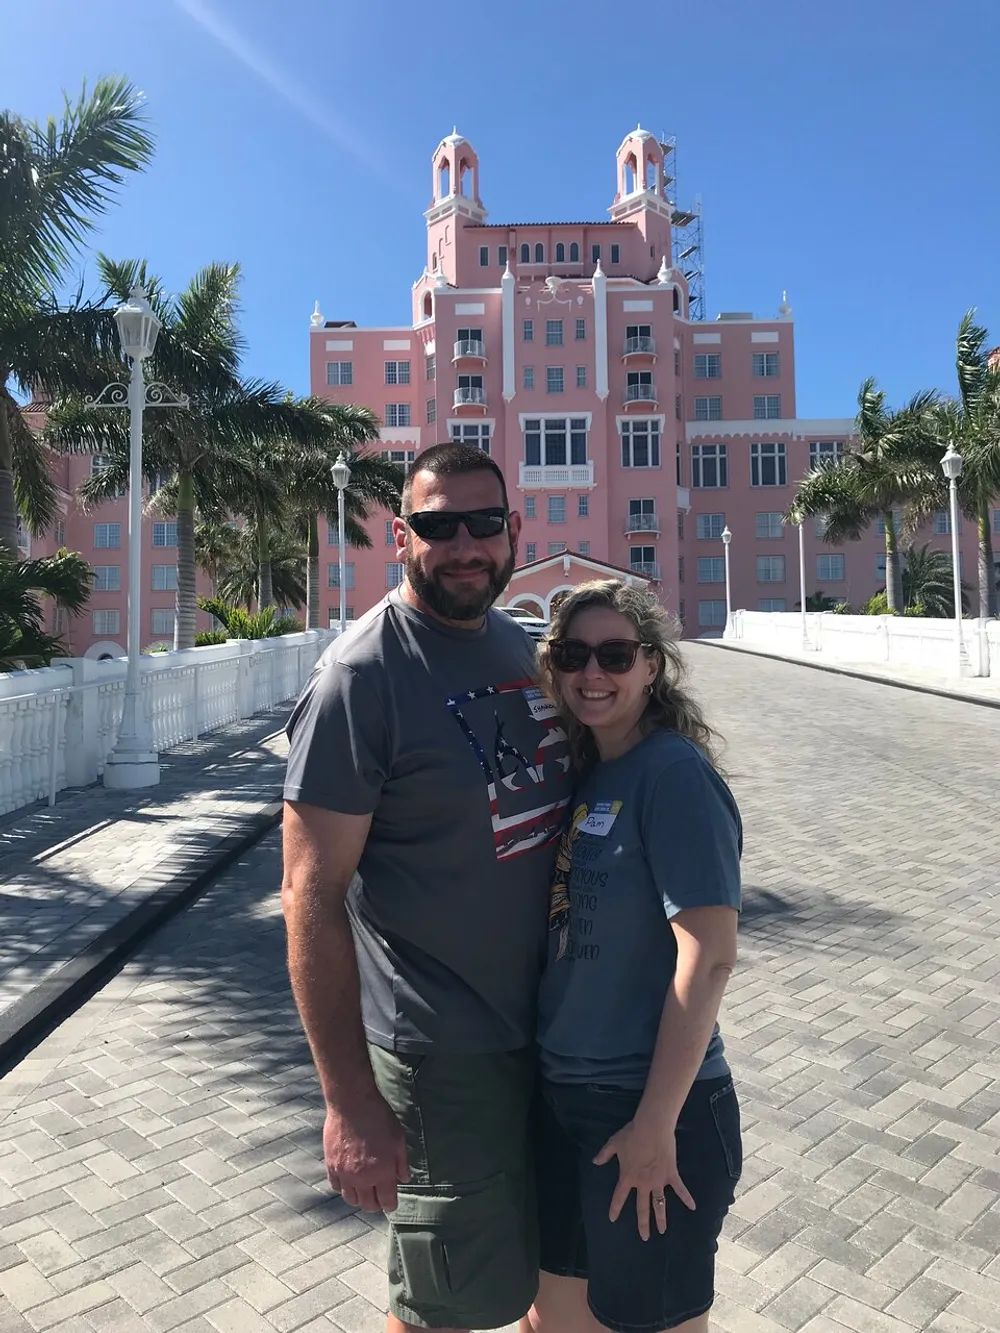 A smiling couple poses for a photo in front of a large pink building with palm trees around them under a clear blue sky